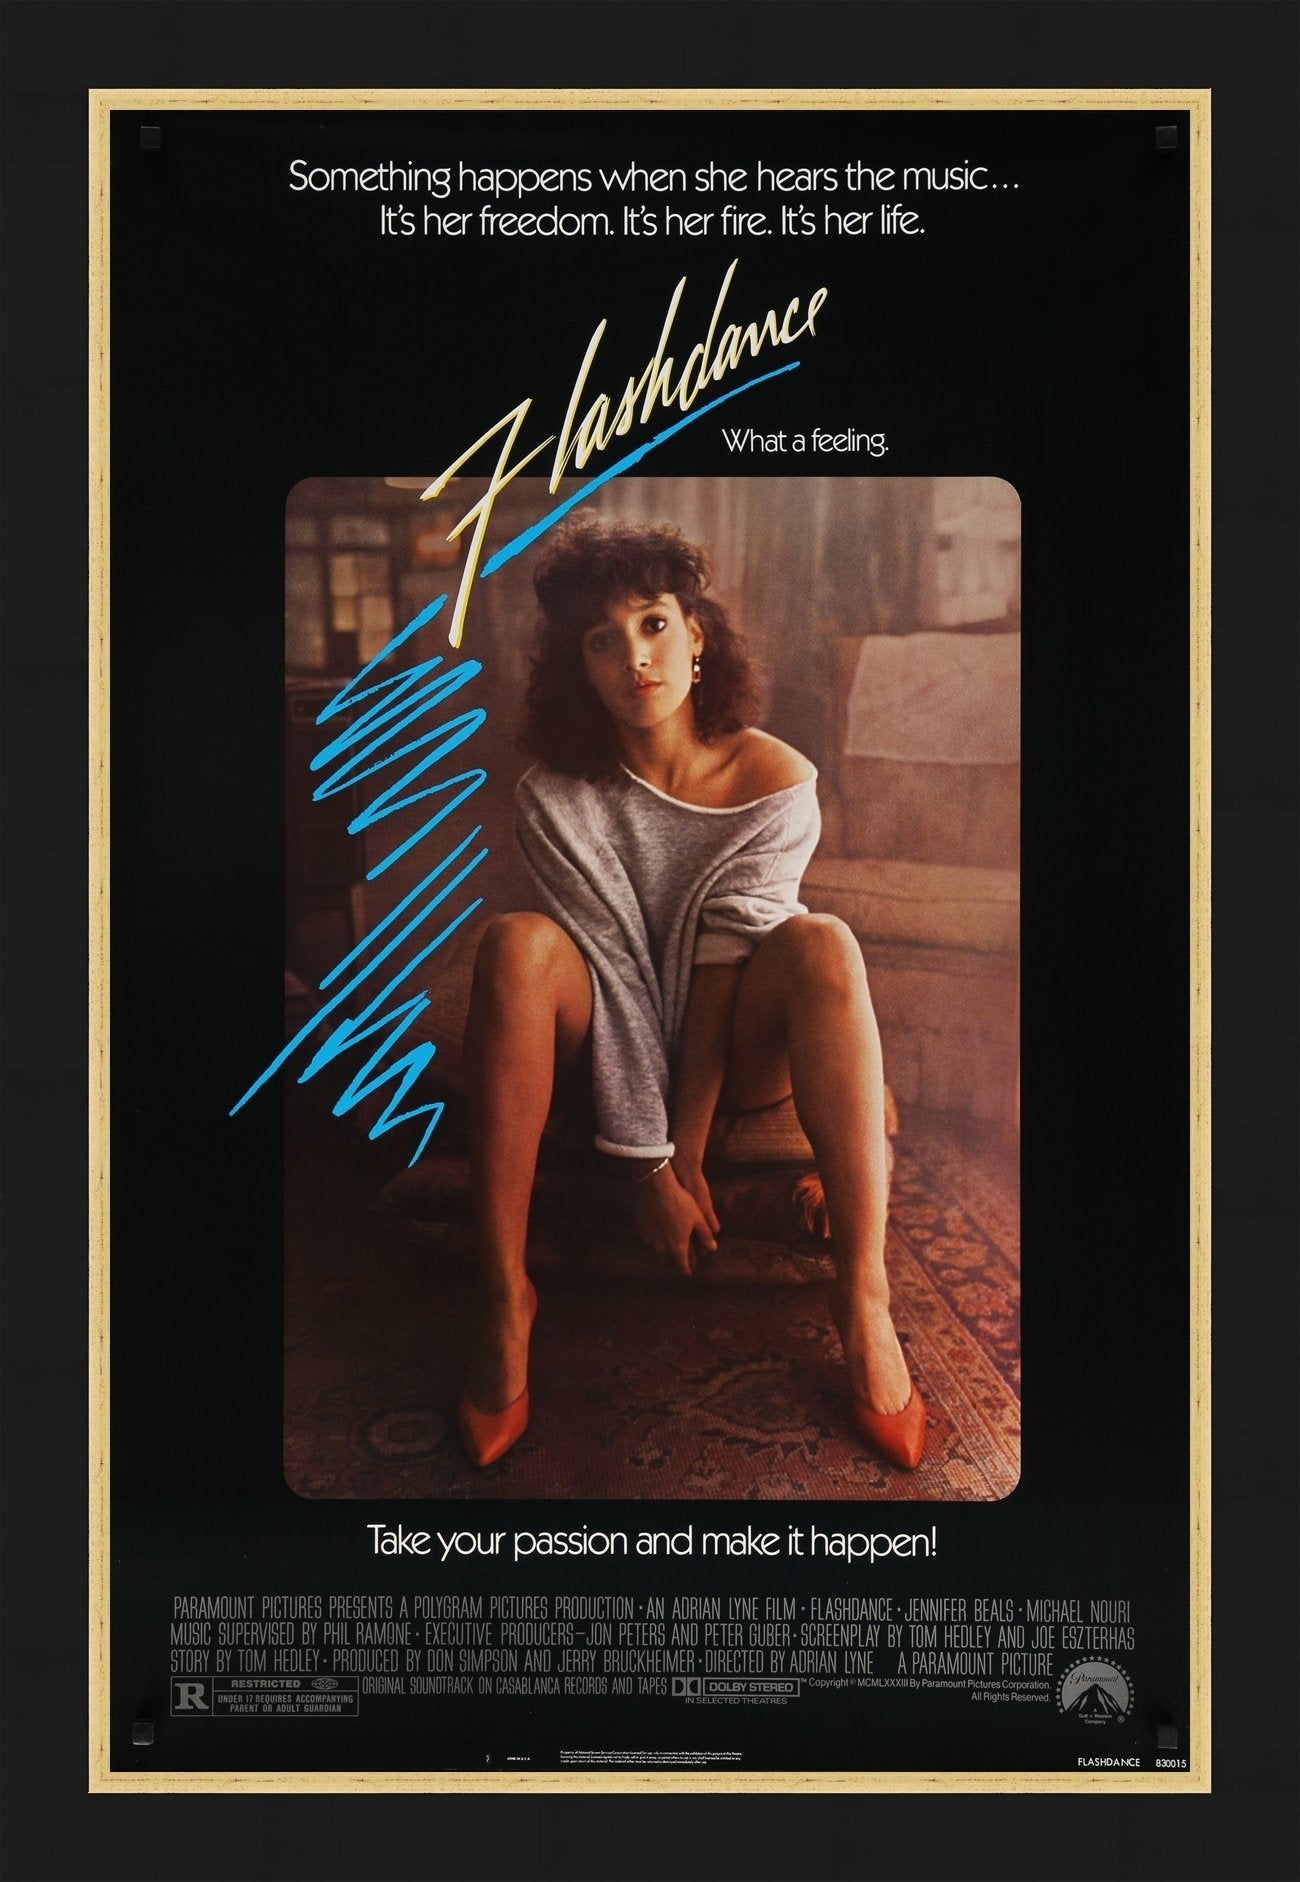 An original movie poster for the film Flashdance